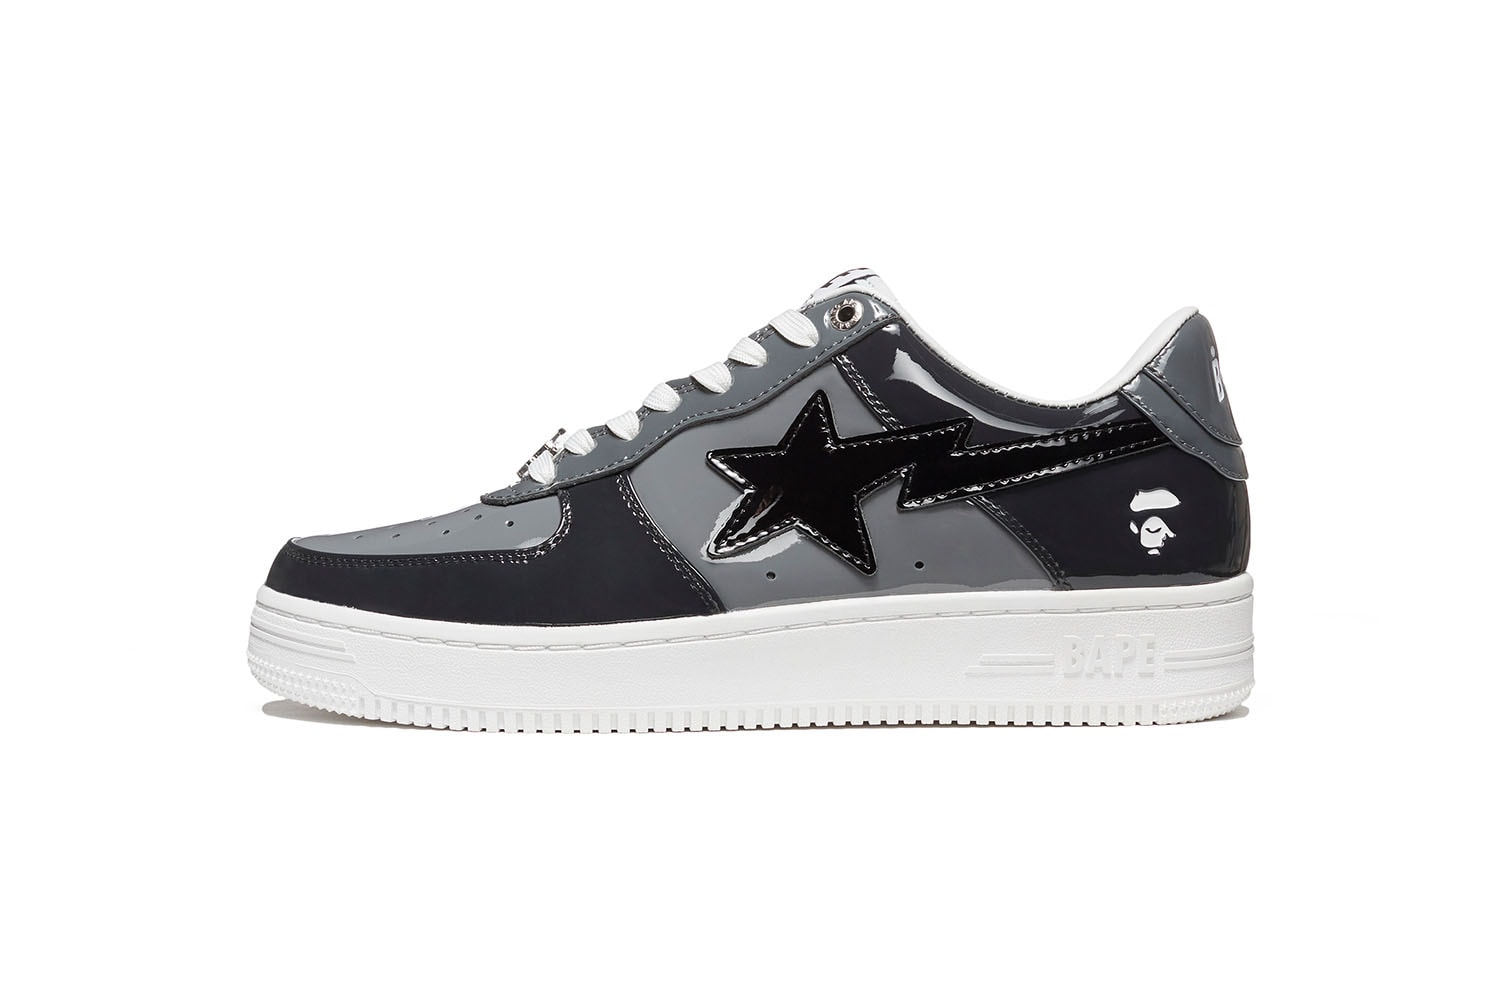 A Bathing Ape's BAPE STA Dropping Six New Colorful Camo Sneakers